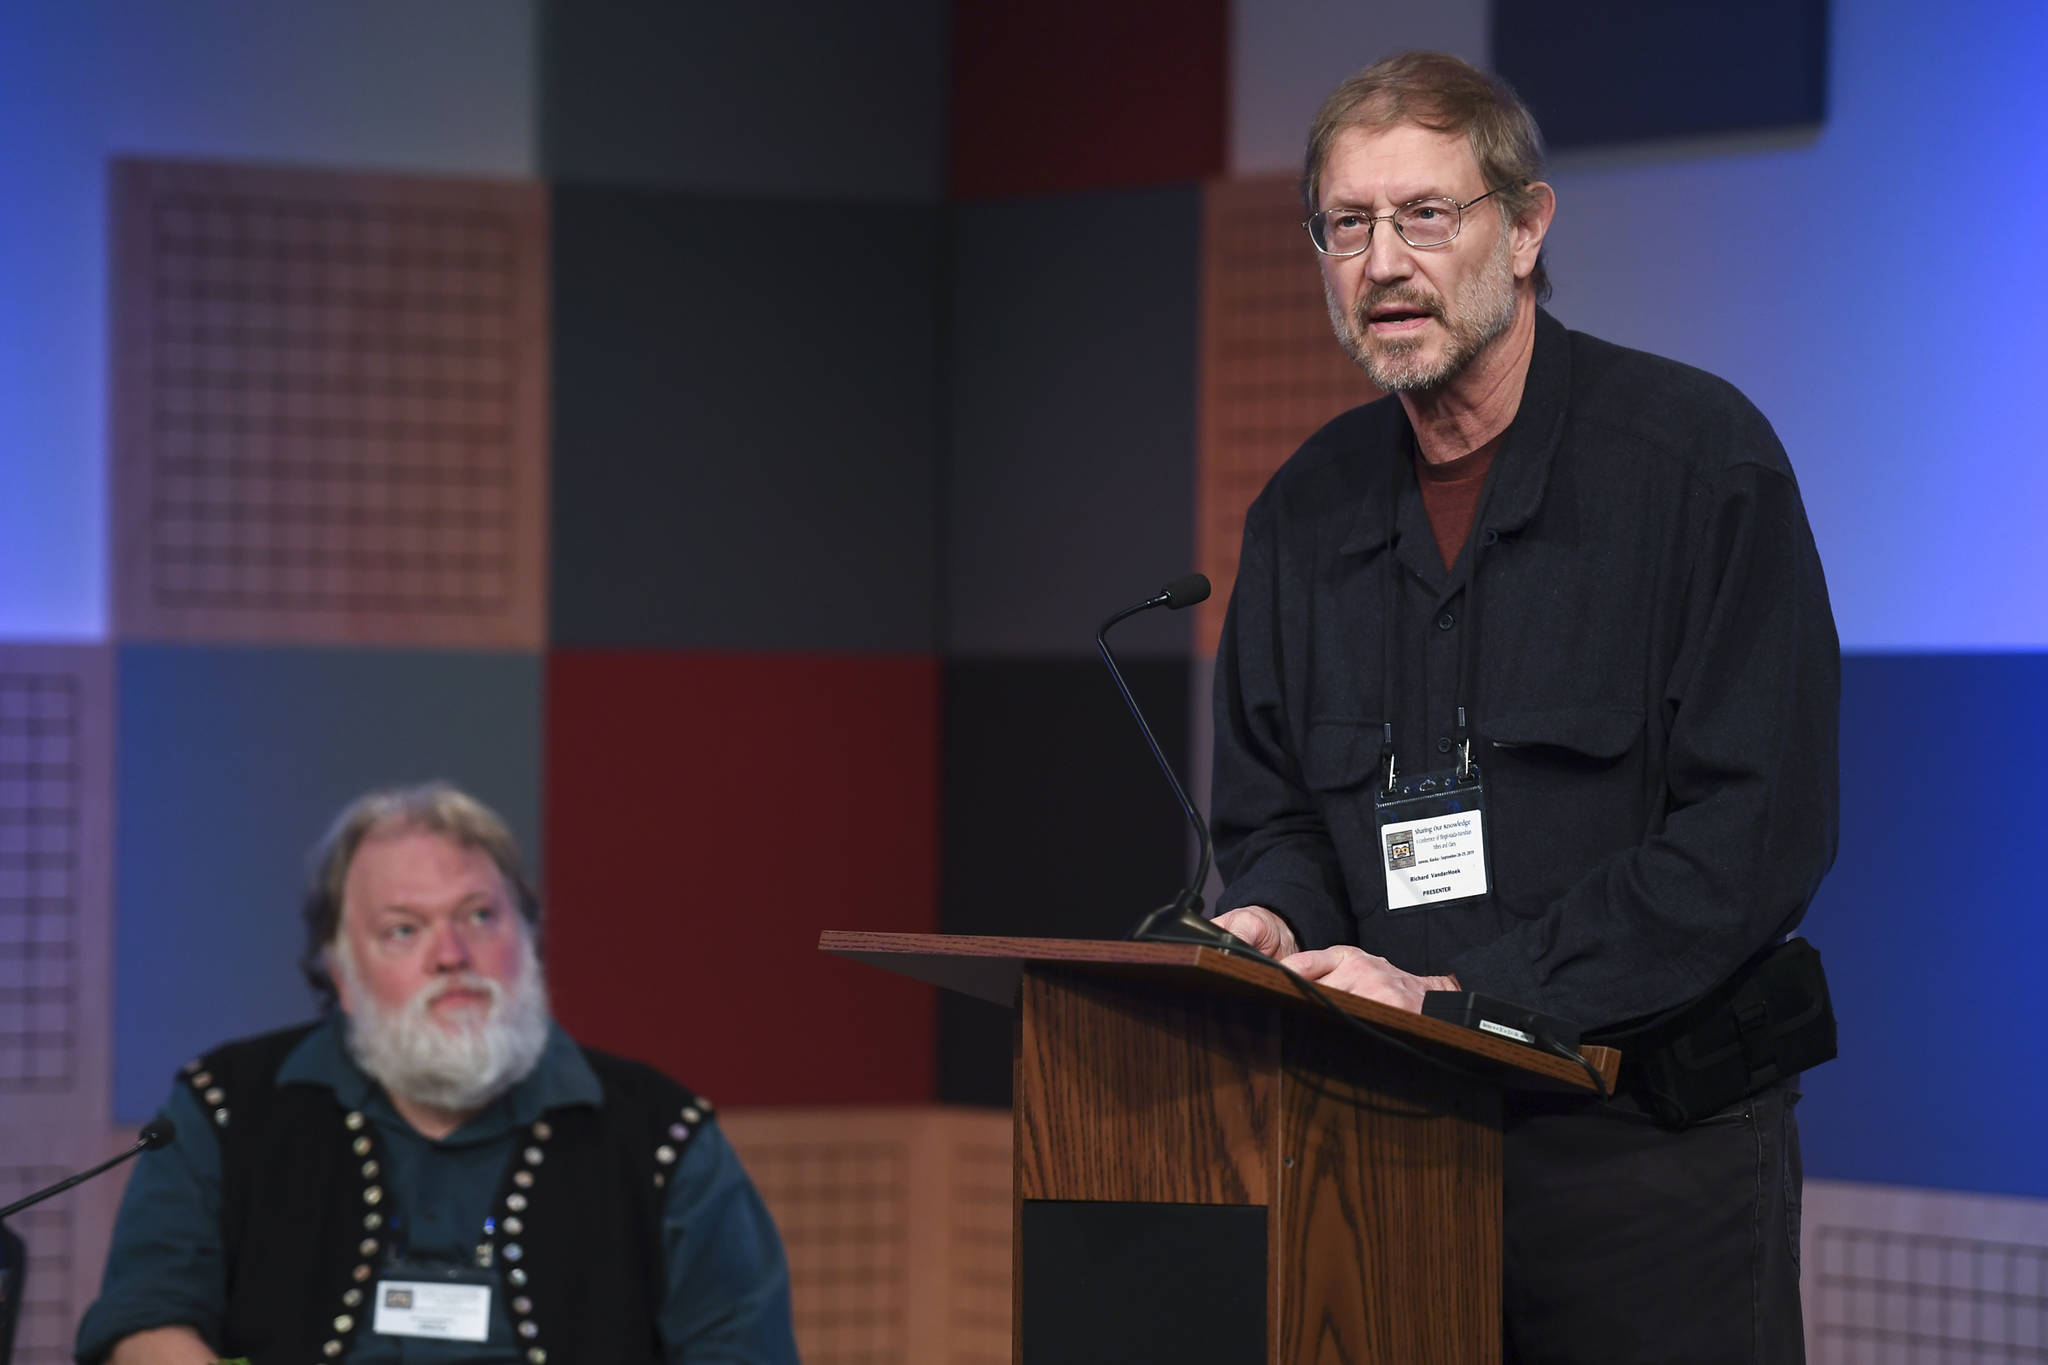 Richard VanderHoek, State Archaeologist with the Alaska Department of Natural Resources’ Office of History and Archaeology, right, and Steve Henrikson, curator of collections at the Alaska State Museum, give a presentation on spear throwing at KTOO as part of the Sharing Our Knowledge conference on Friday, Sept. 27, 2019. (Michael Penn | Juneau Empire)